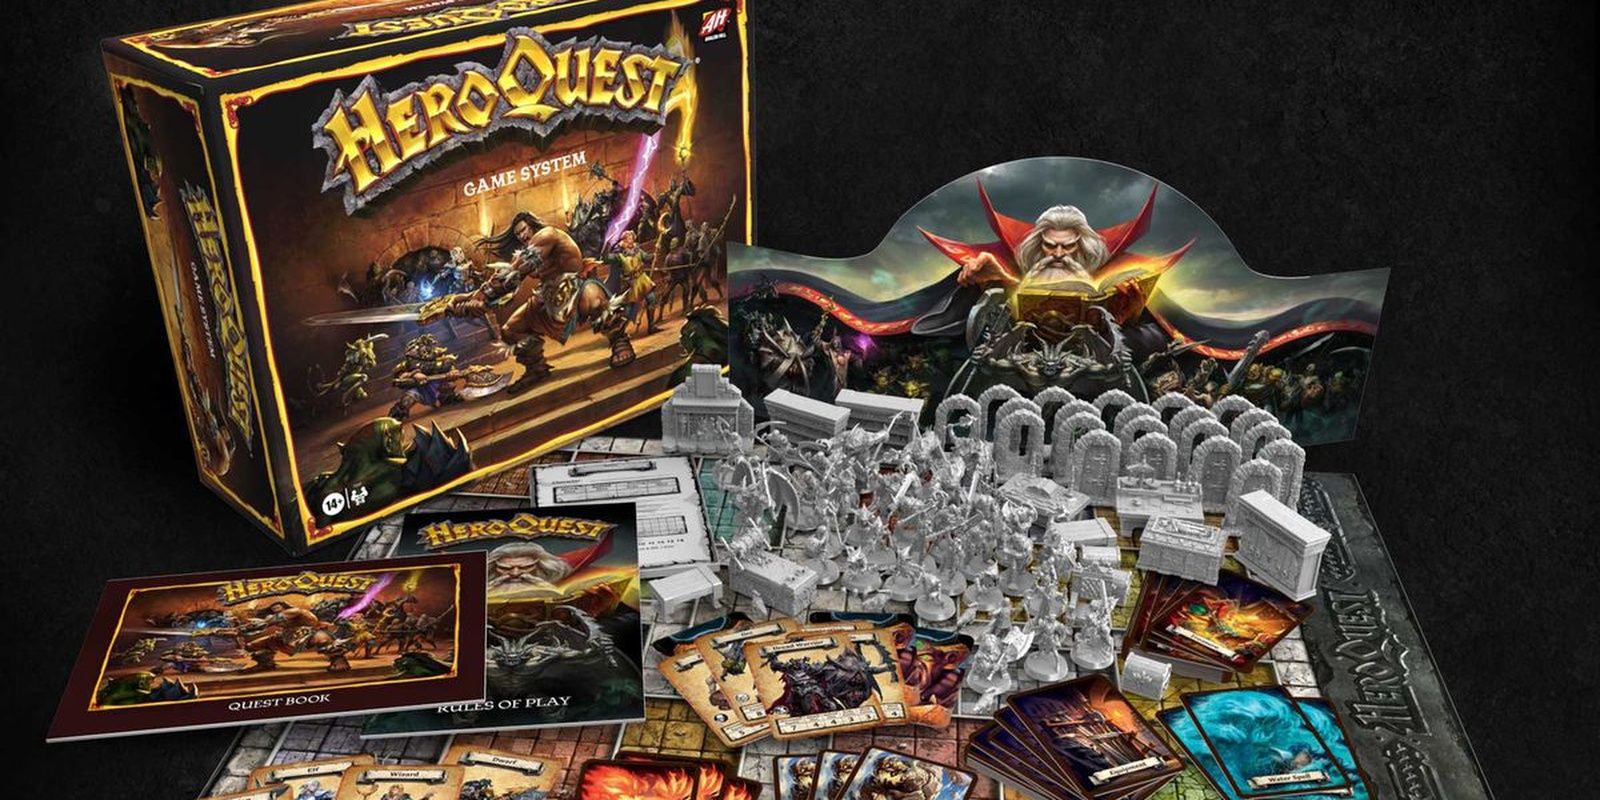 The miniatures, cards, and box of Heroquest board game